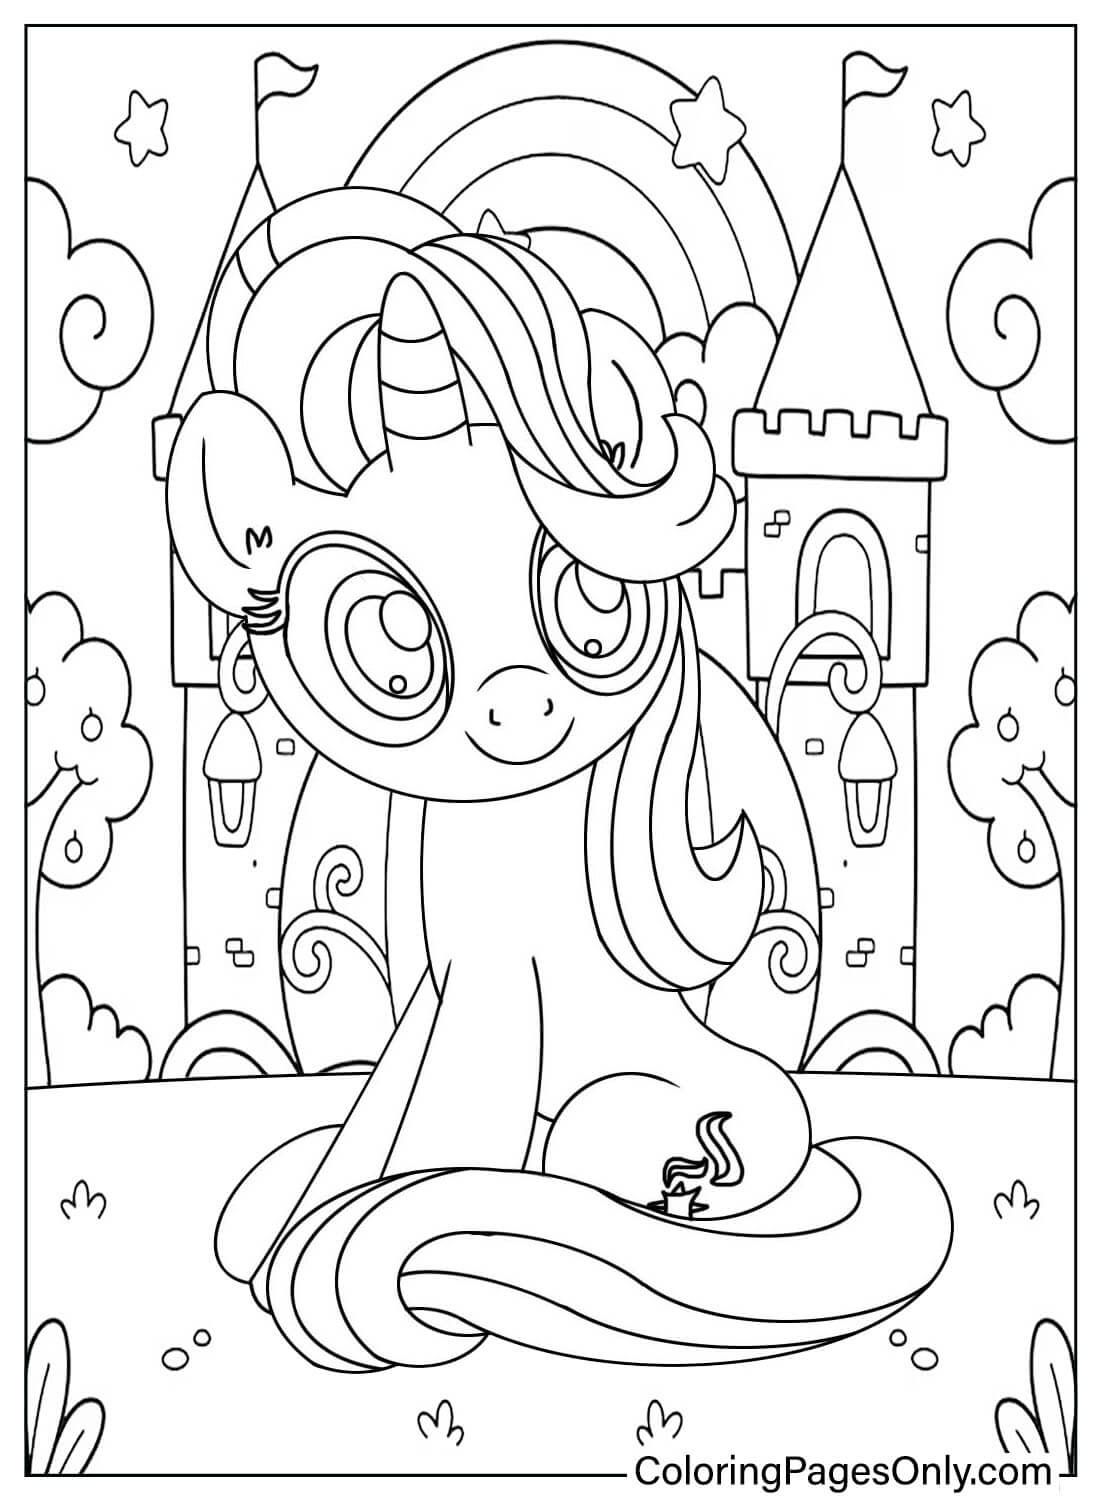 Starlight Glimmer Coloring Page Free from Starlight Glimmer